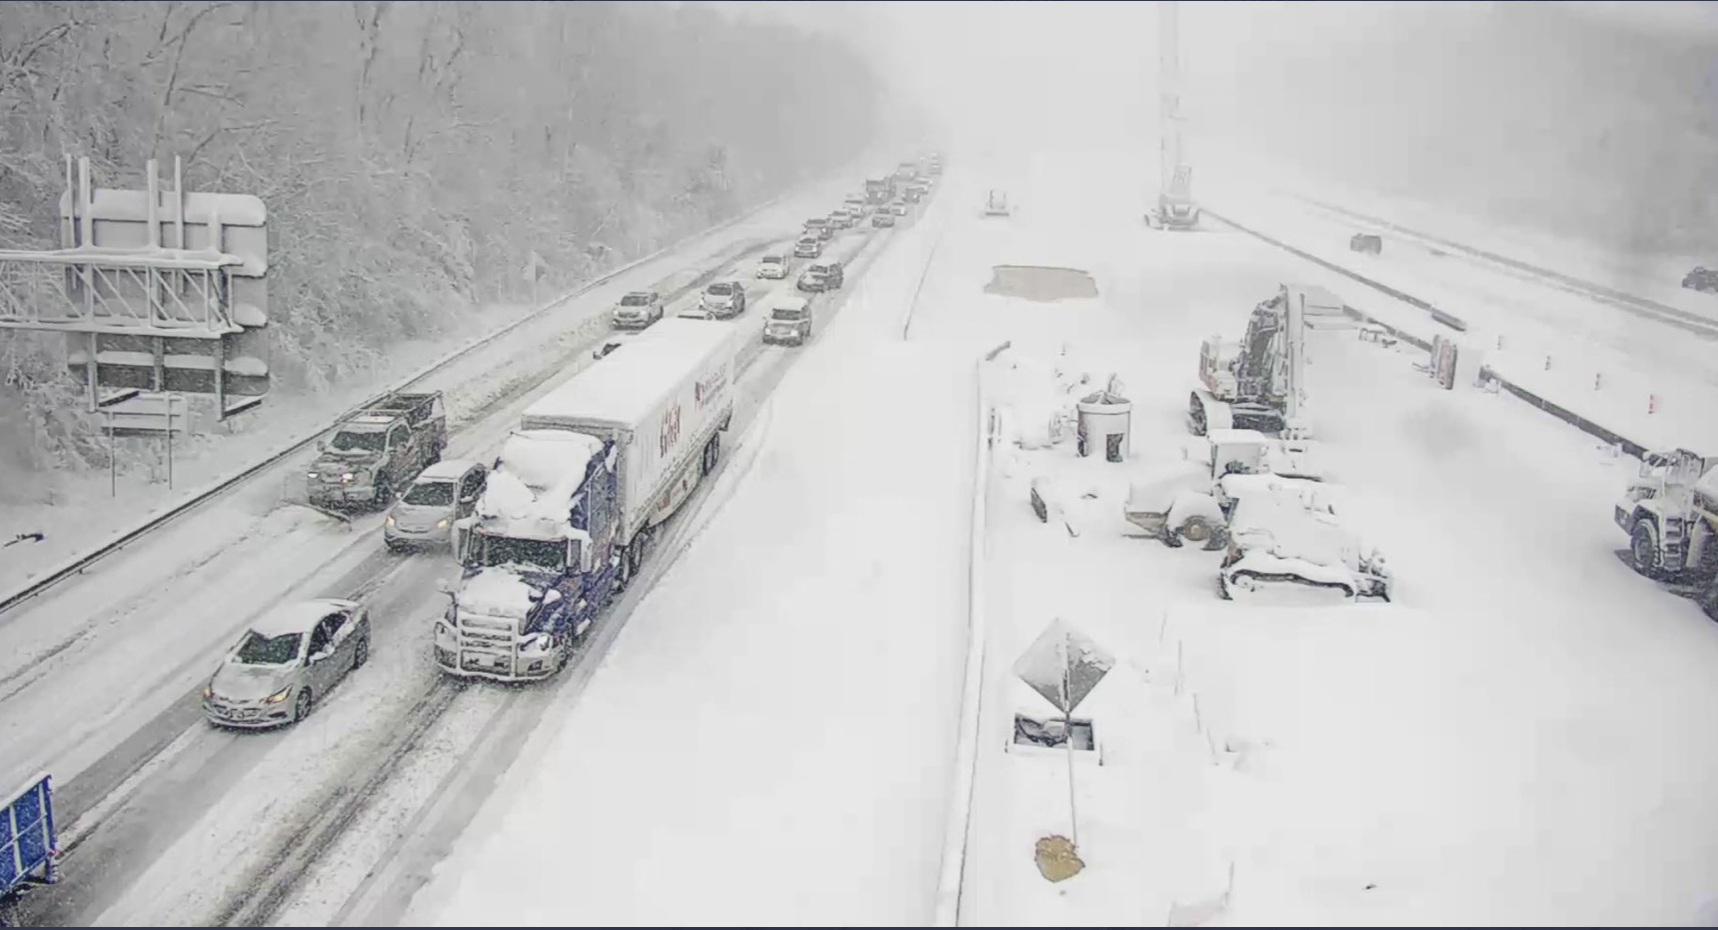 This image provided by the Virginia department of Transportation shows a closed section of Interstate 95 near Fredericksburg, Va. Monday Jan. 3, 2022. Both northbound and southbound sections of the highway were closed due to snow and ice. 